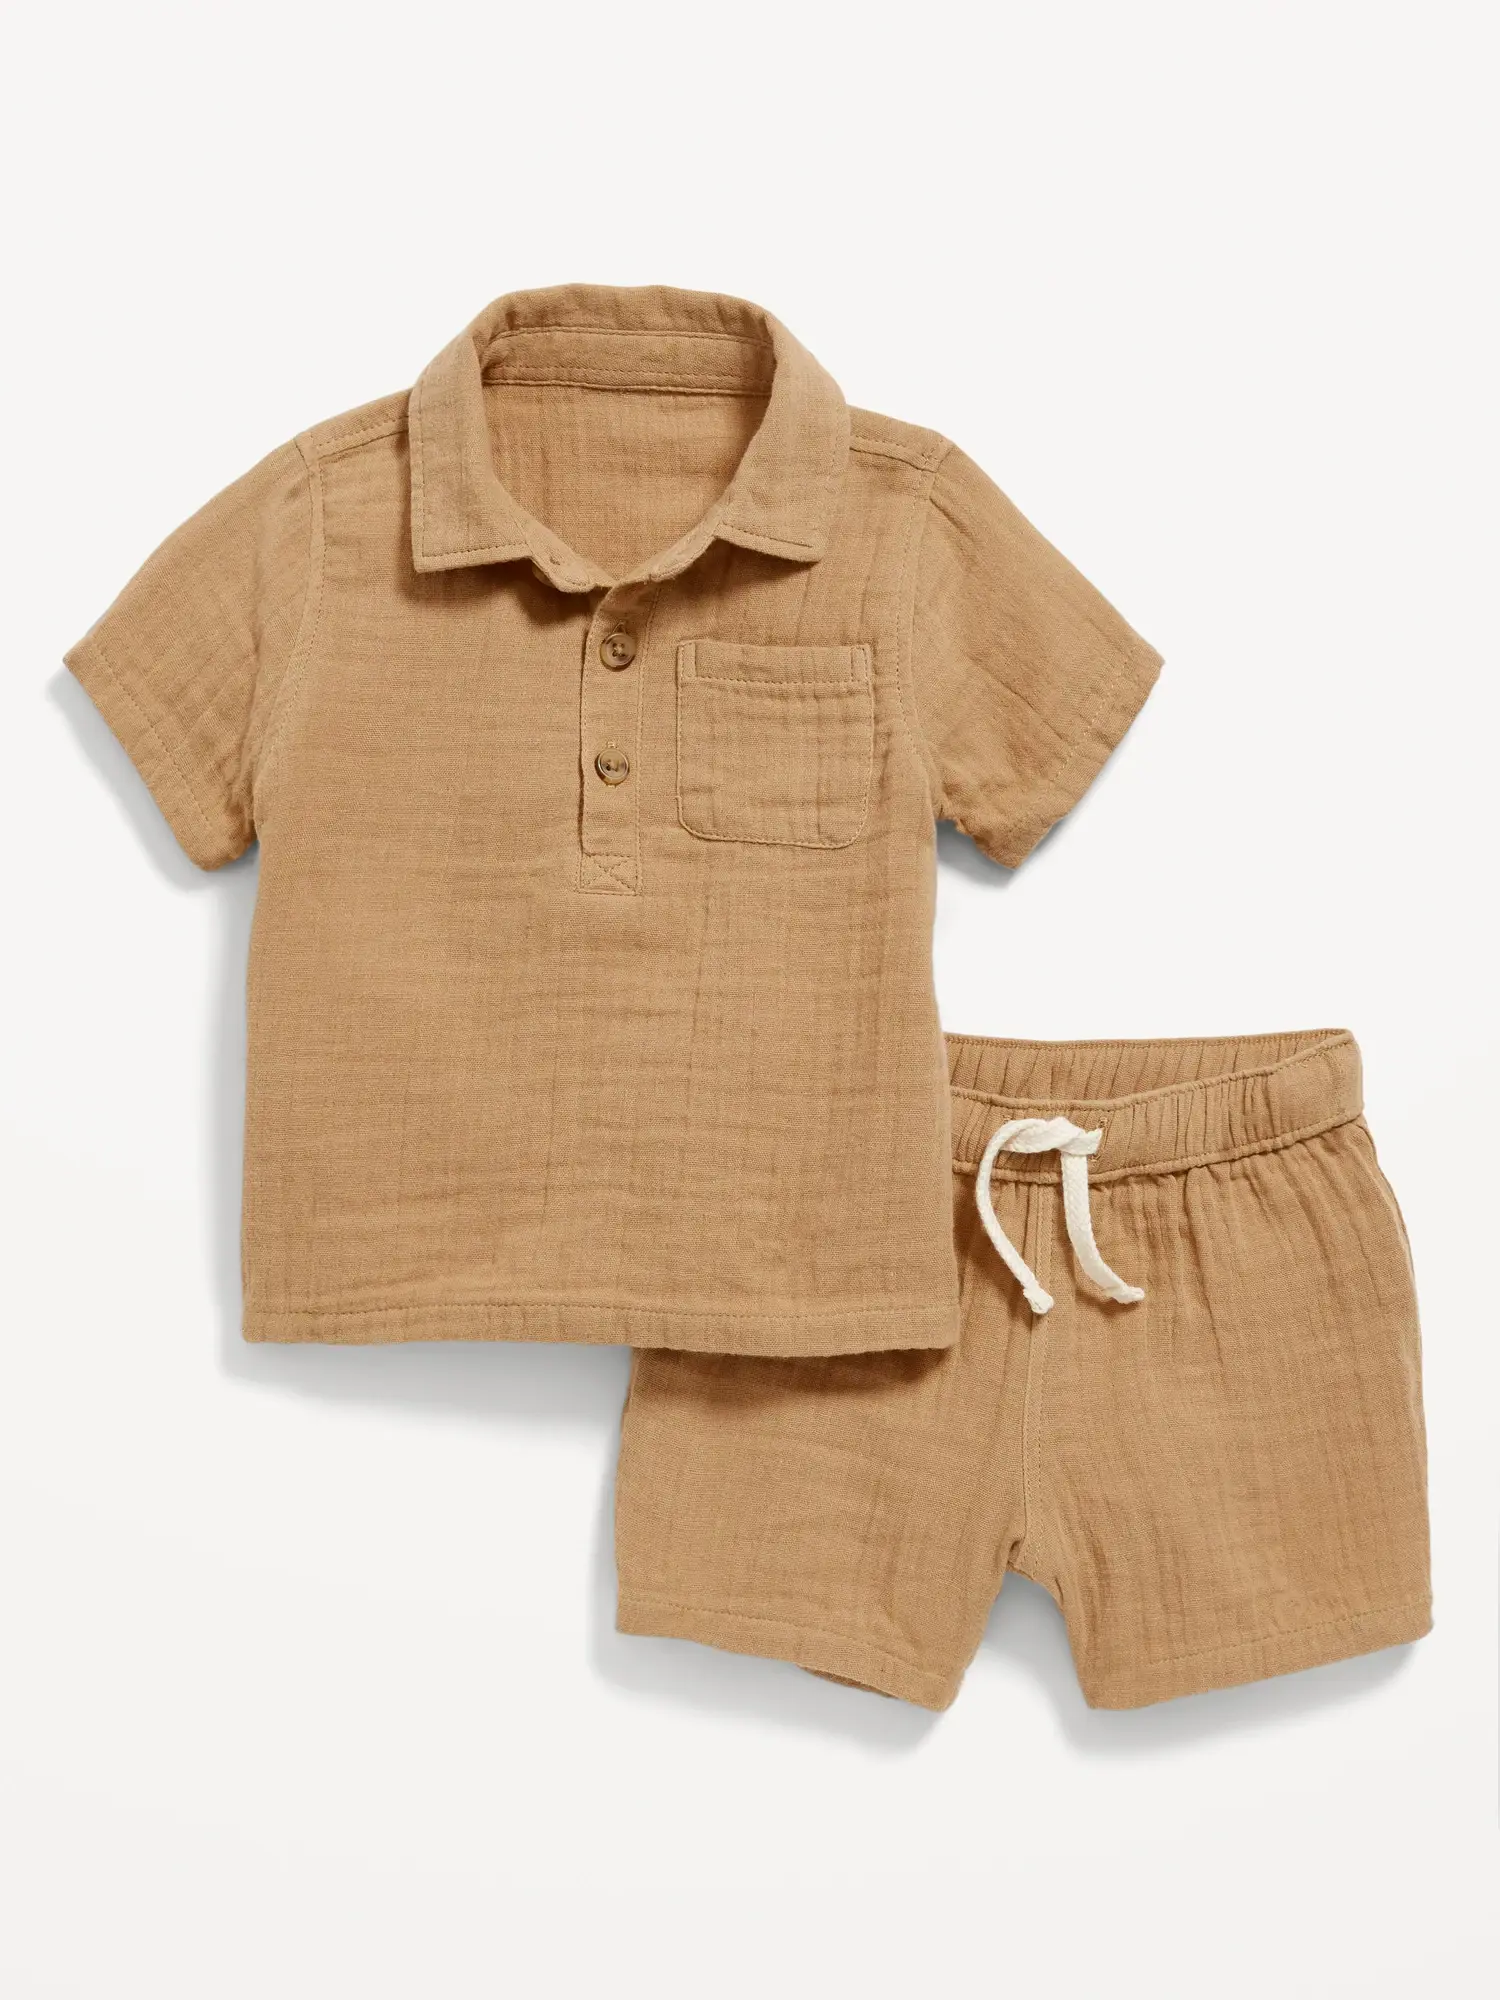 Old Navy Unisex Textured Double-Weave Shirt & Shorts Set for Baby brown. 1